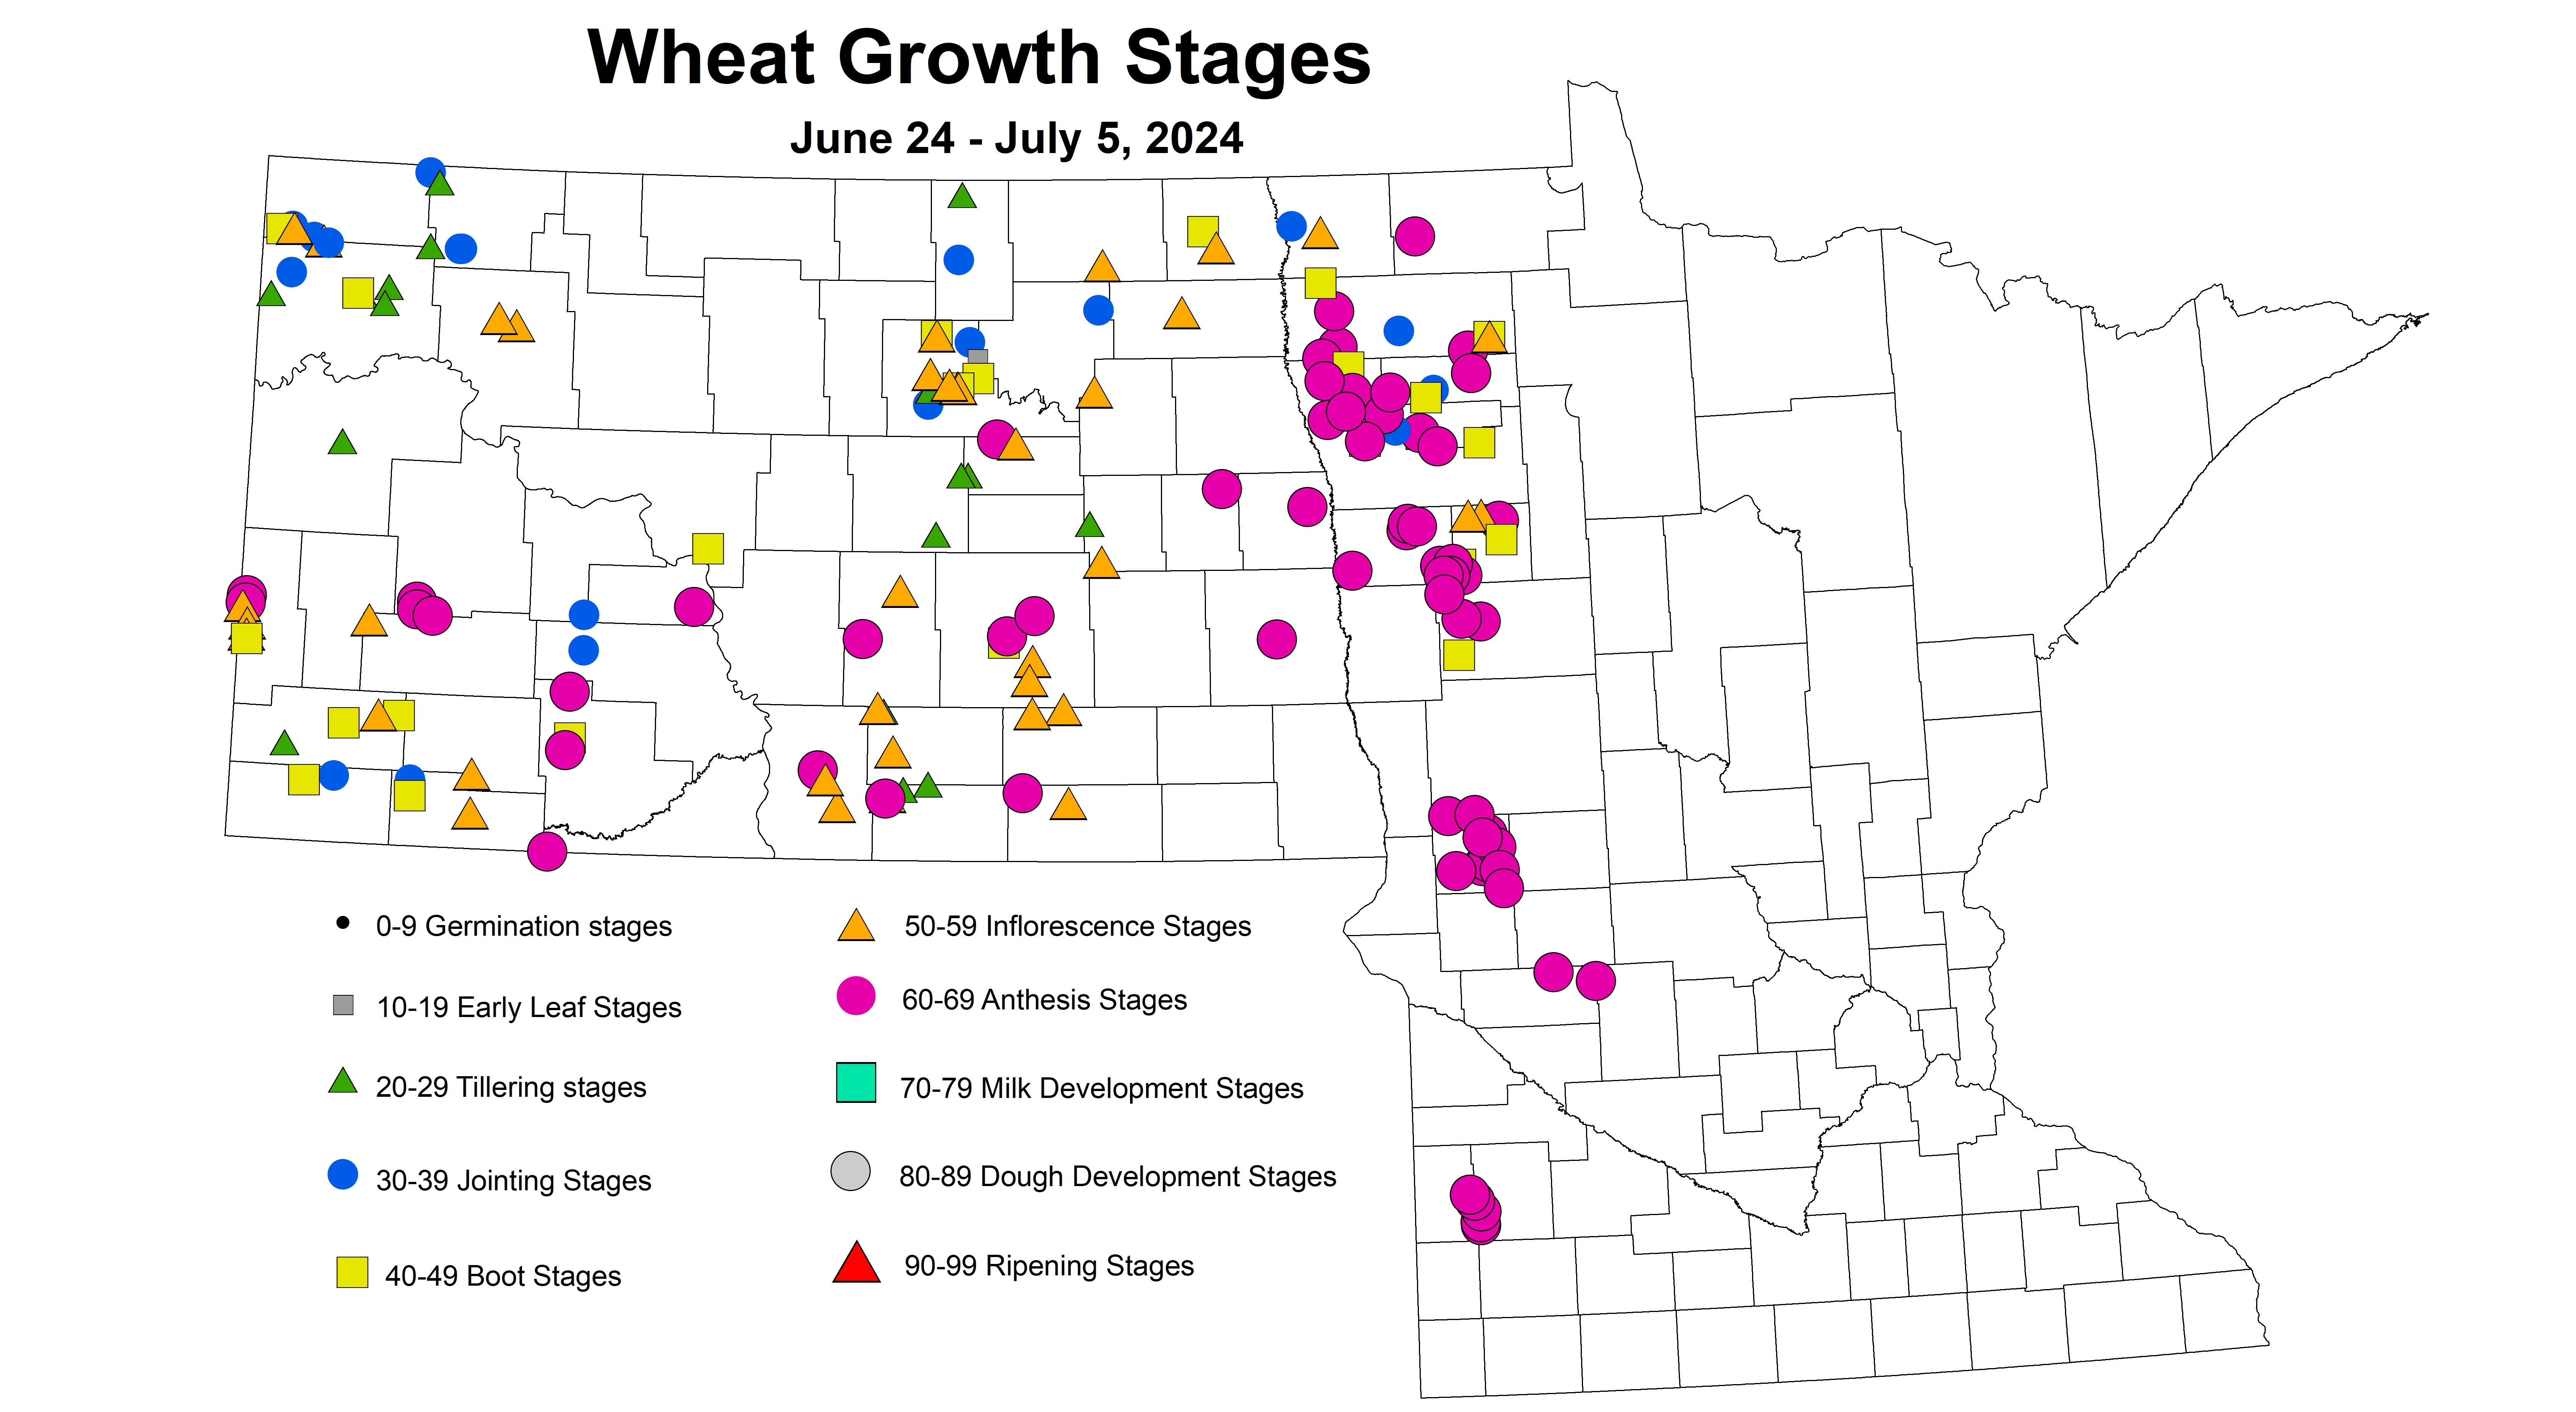 wheat growth stages 2024 6.24-7.5